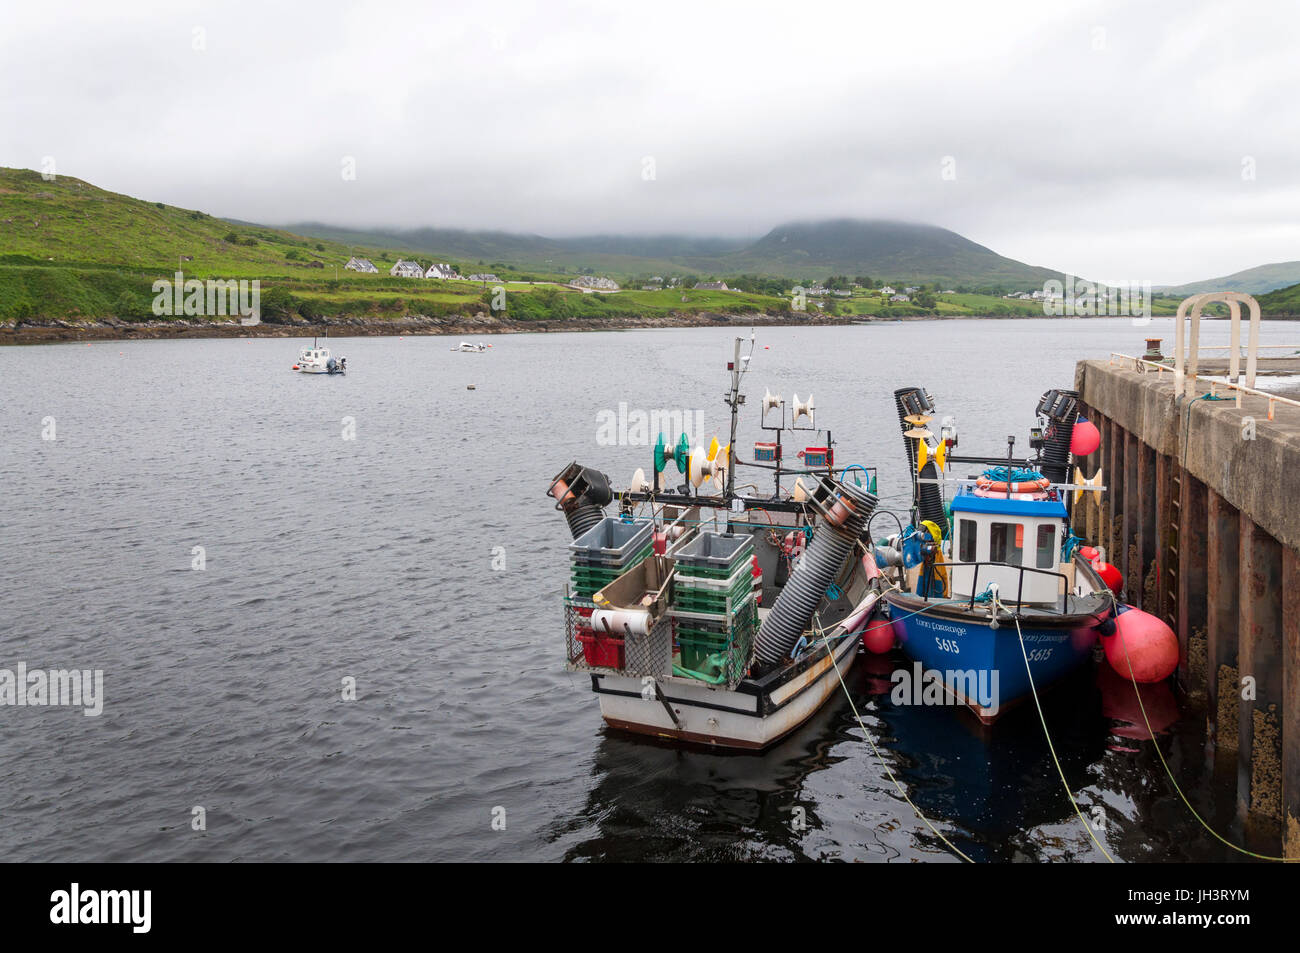 Inshore fishing vessels at Teelin pier harbour, County Donegal, Ireland Stock Photo